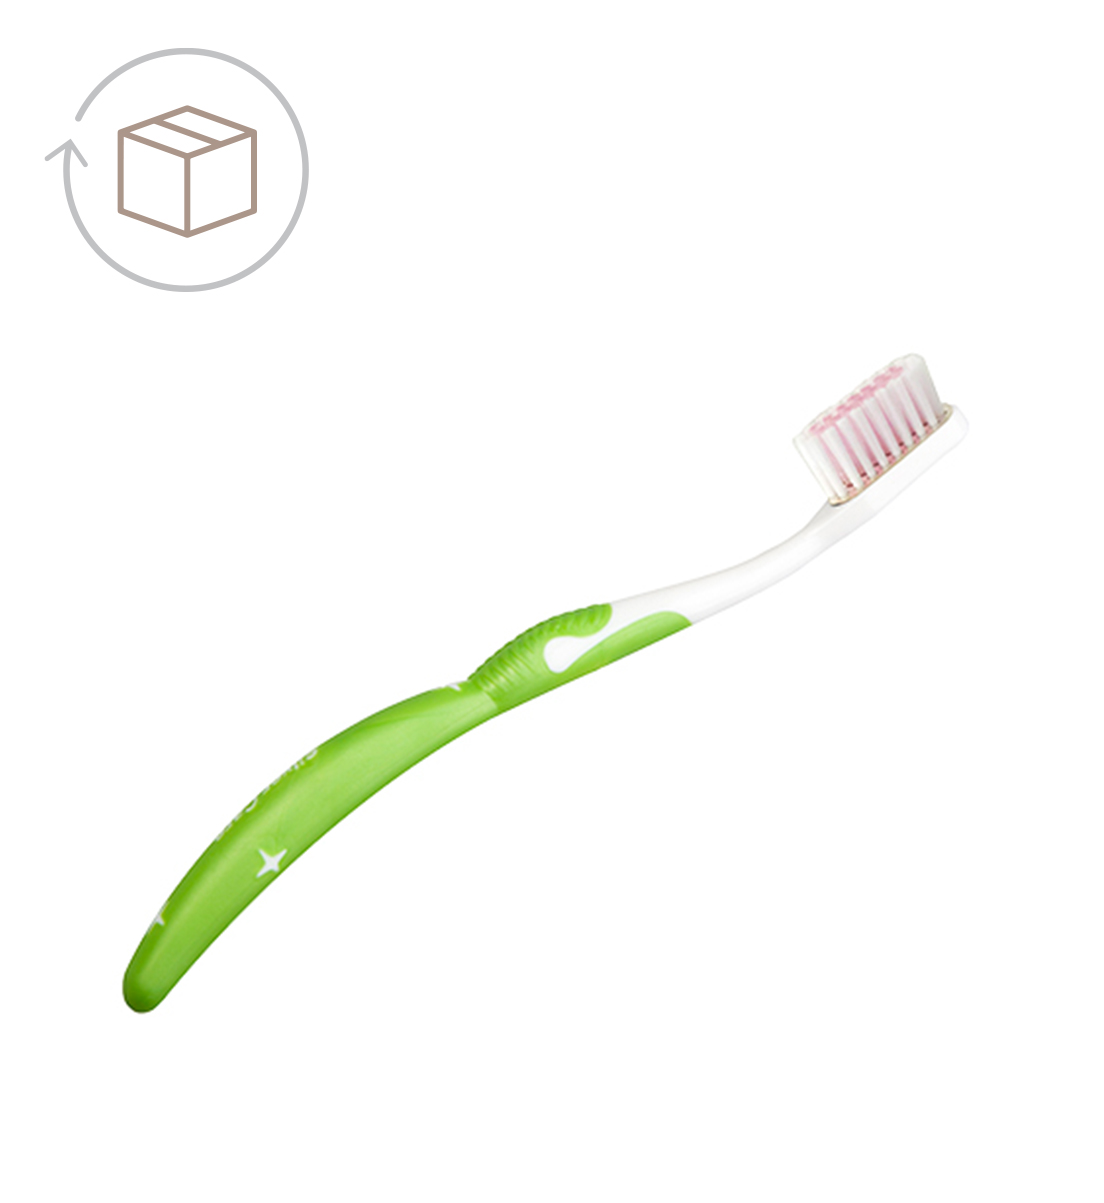 Adult Silver Care Soft Toothbrush, green